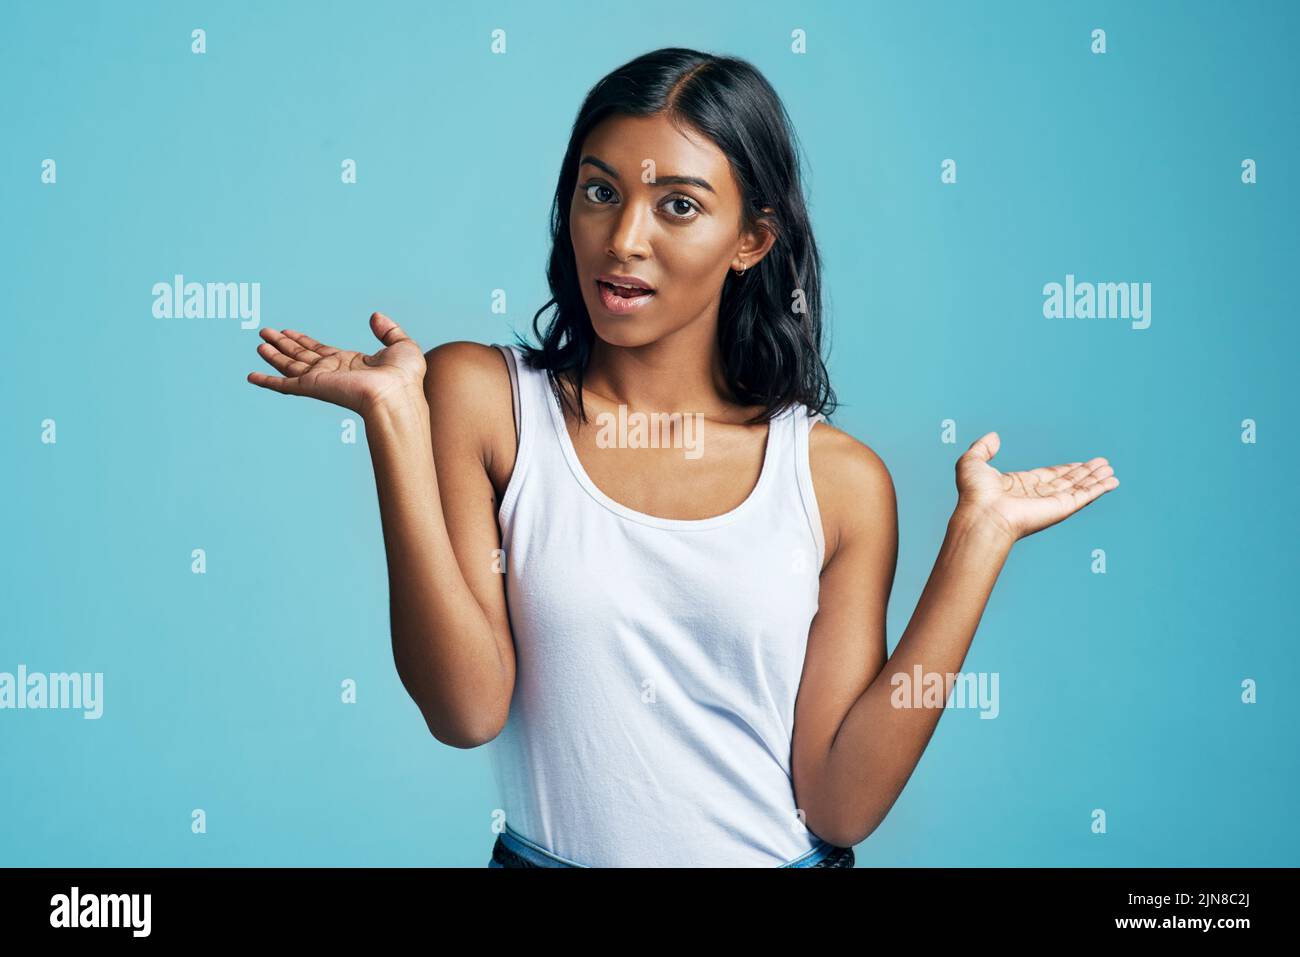 Beats me. Studio portrait of a beautiful young woman shrugging her shoulders against a blue background. Stock Photo